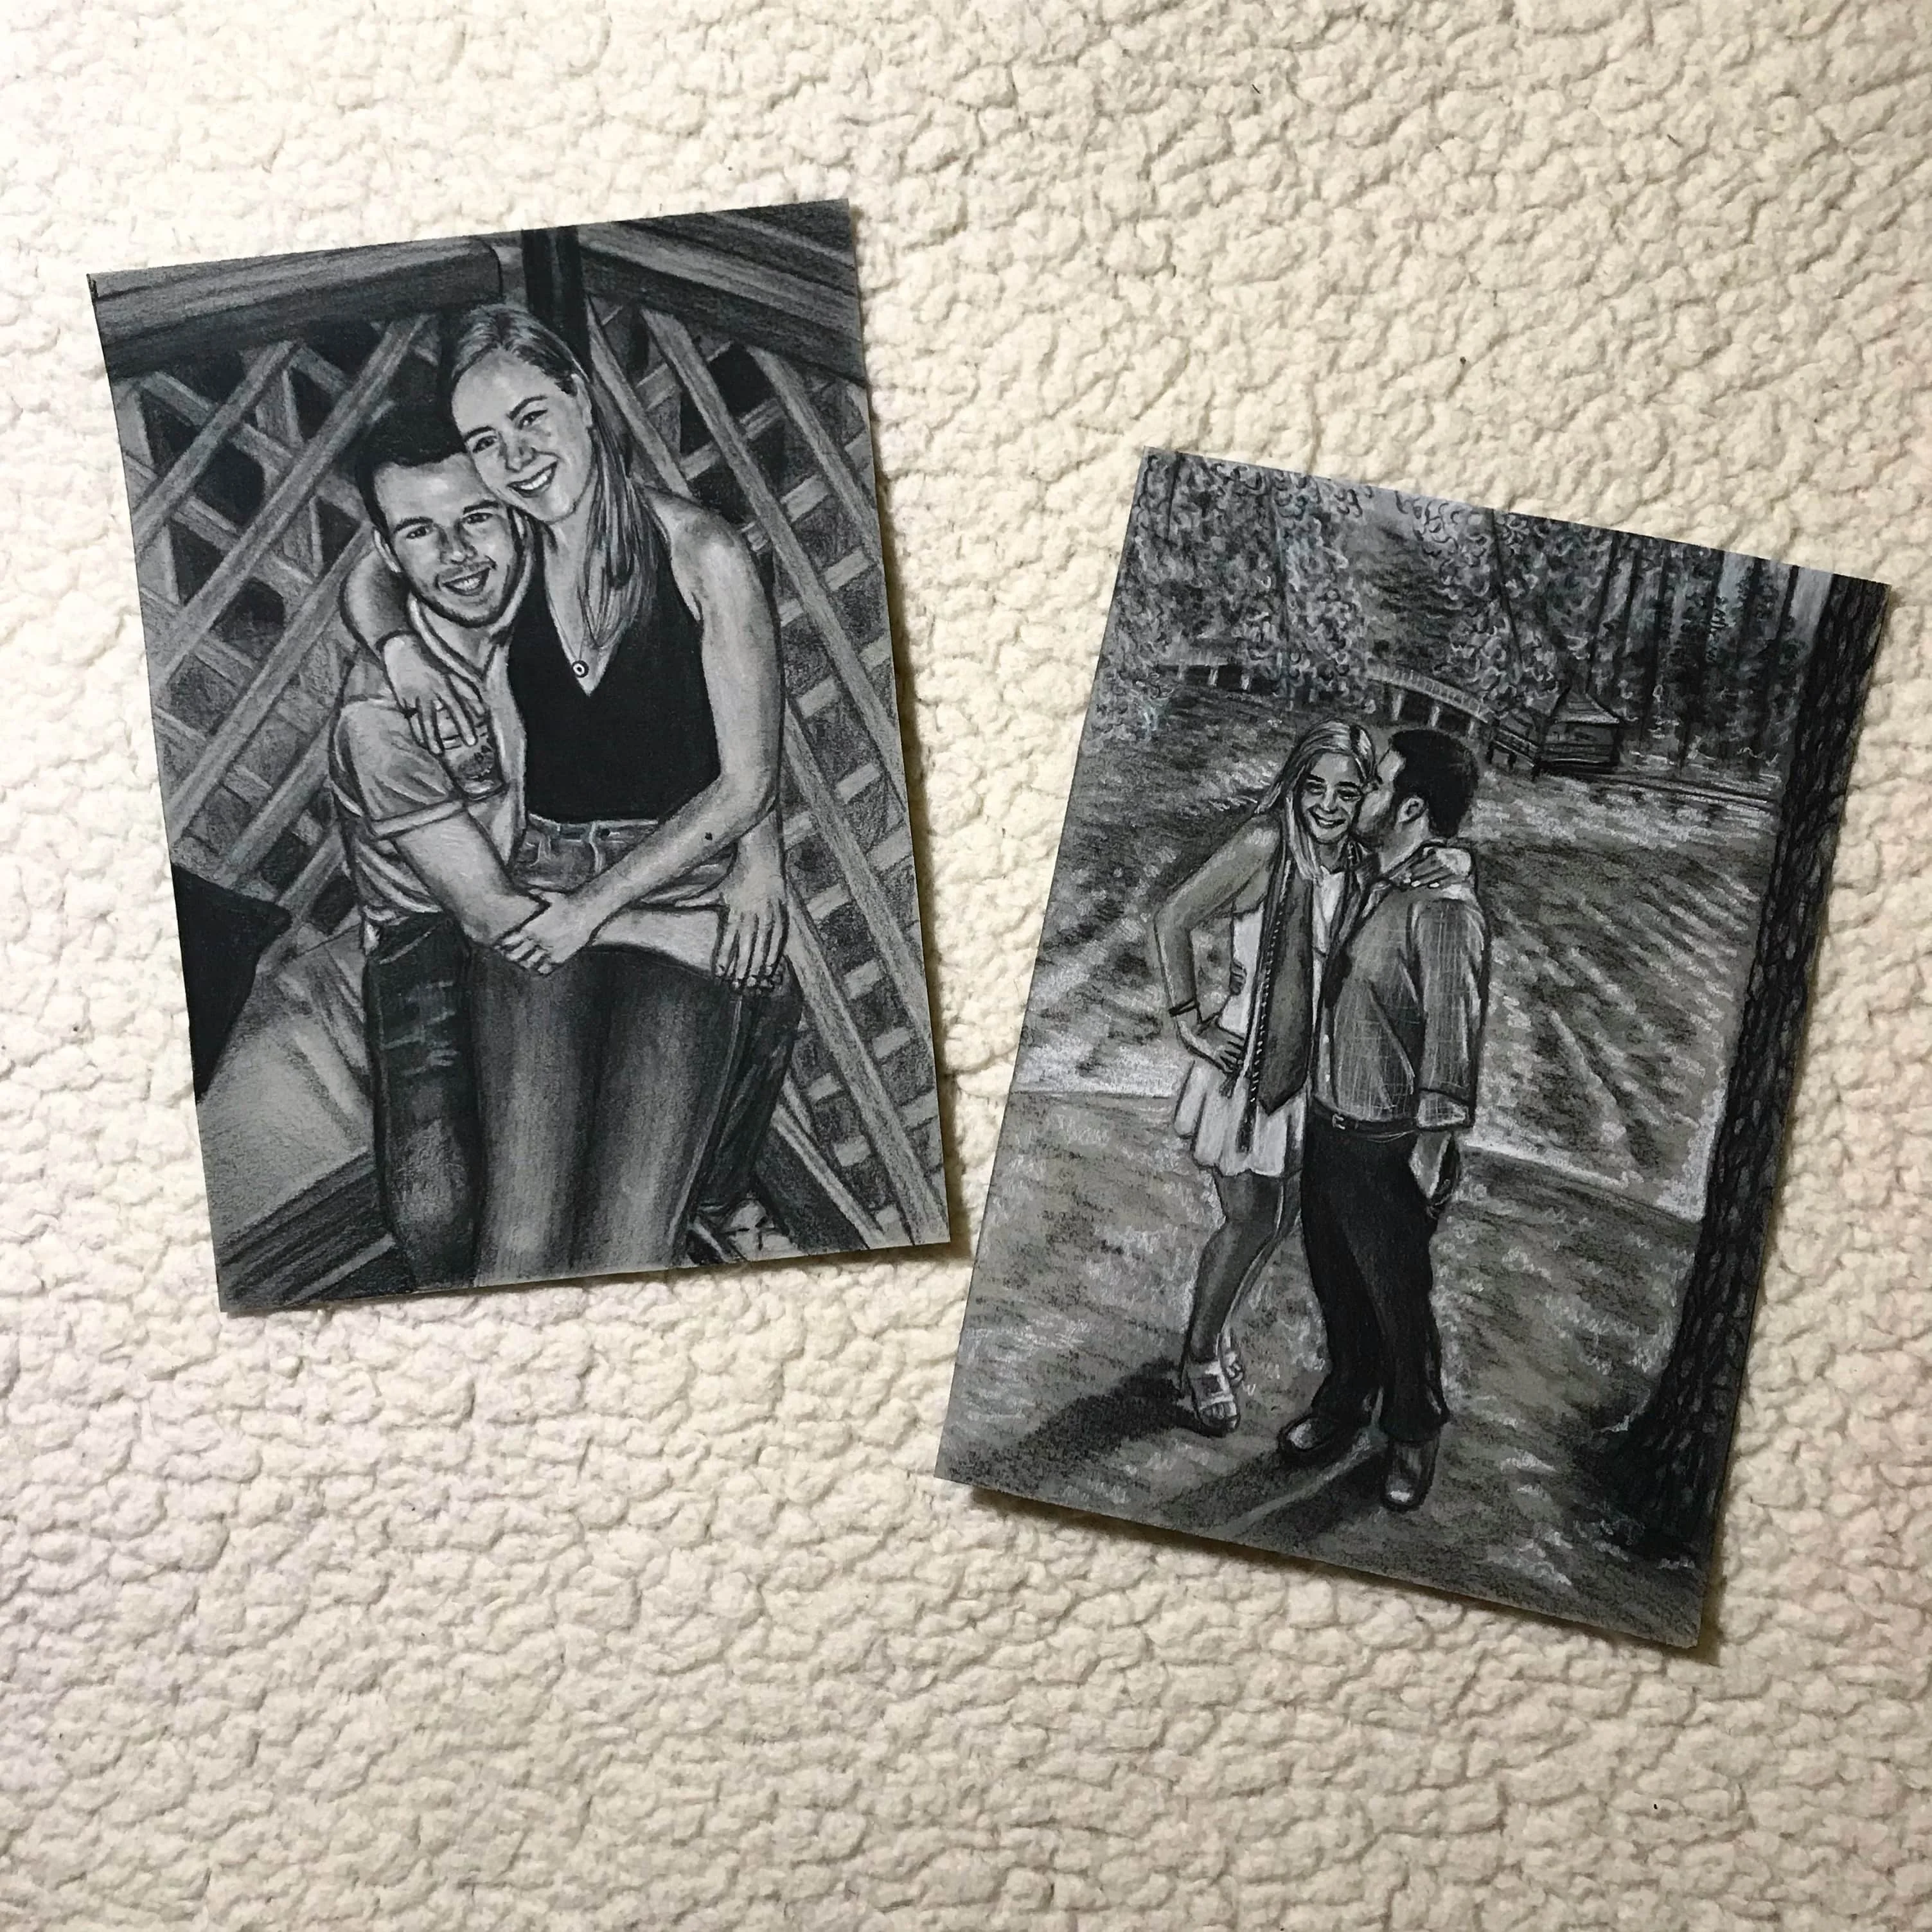 Drawings of Kyle and his girlfriend